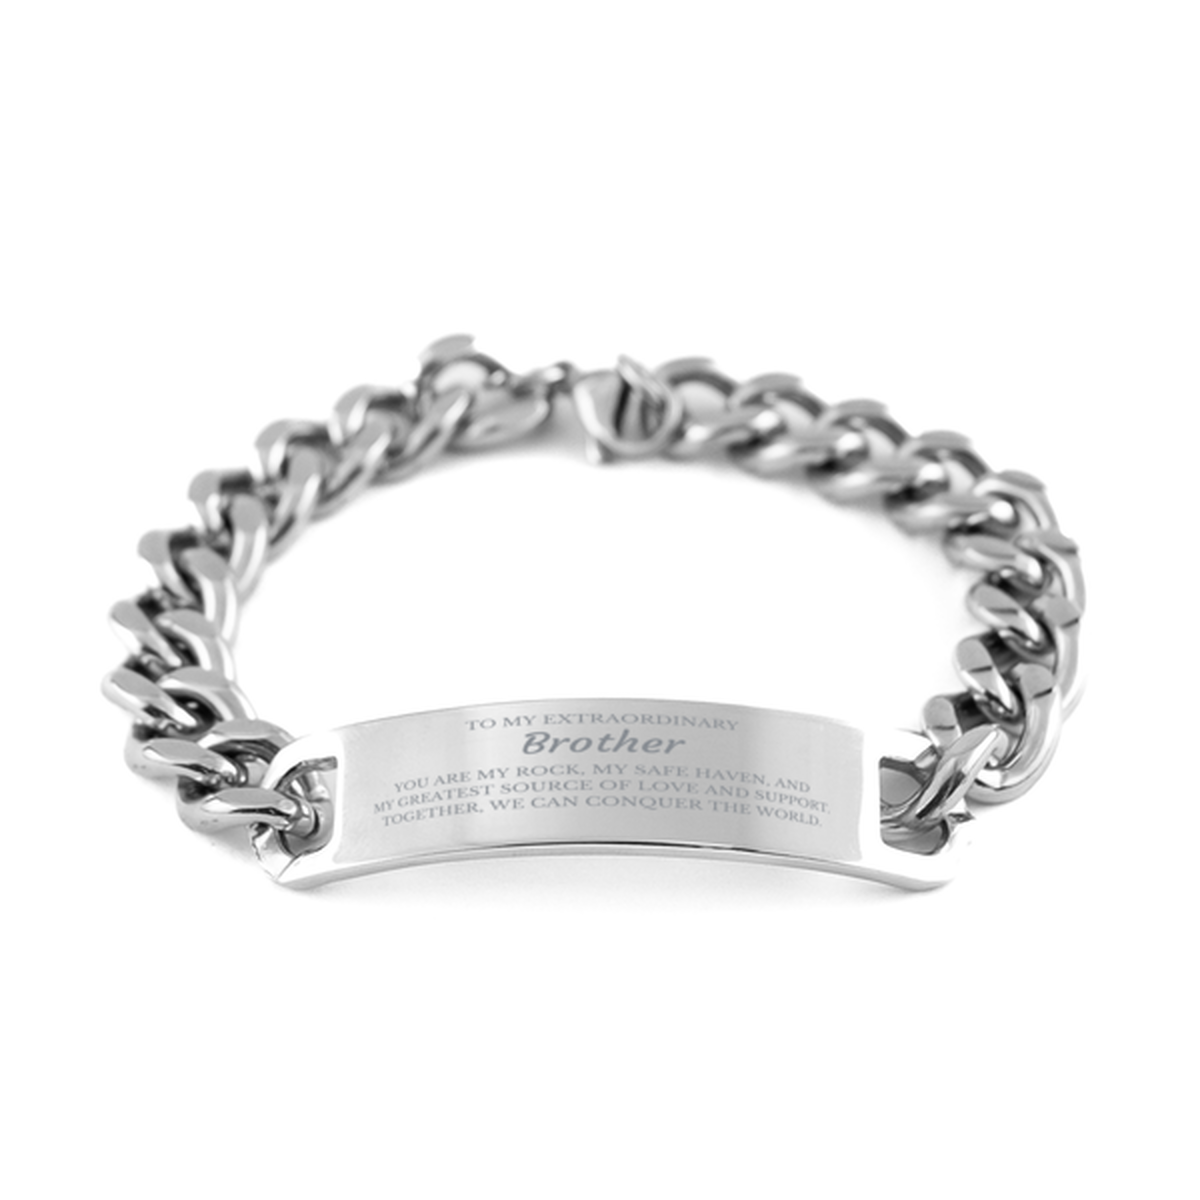 To My Extraordinary Brother Gifts, Together, we can conquer the world, Birthday Cuban Chain Stainless Steel Bracelet For Brother, Christmas Gifts For Brother